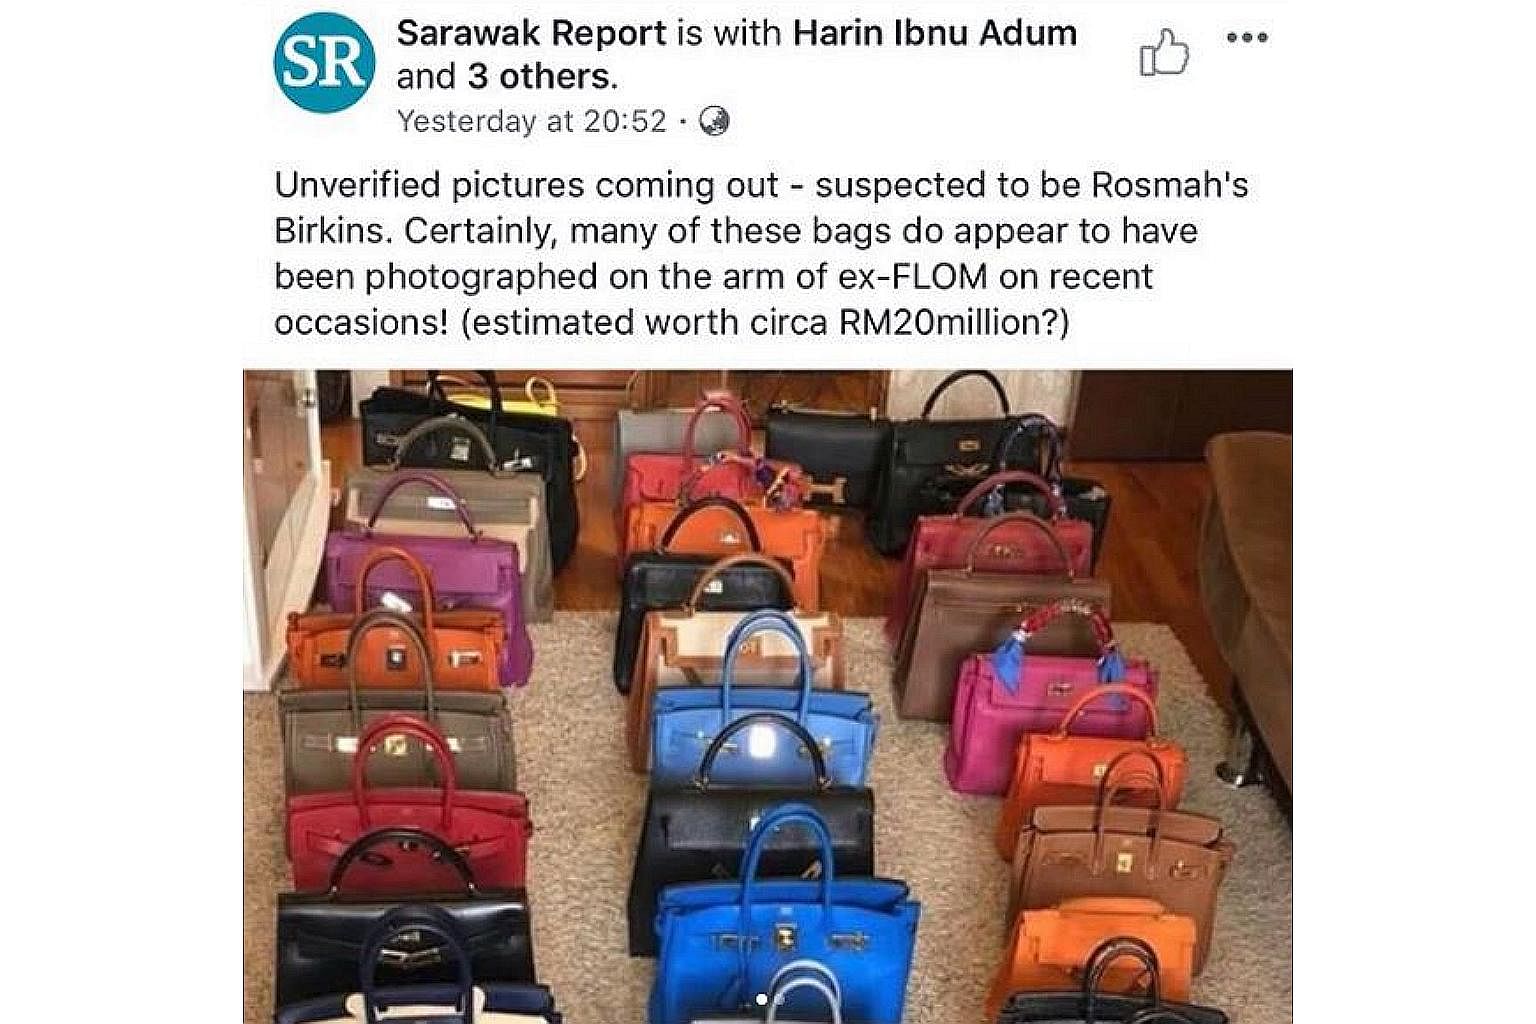 Viral Photos Of Seized Birkins Rolex Watches Aren T From Najib S Home But Stock Photos Se Asia News Top Stories The Straits Times